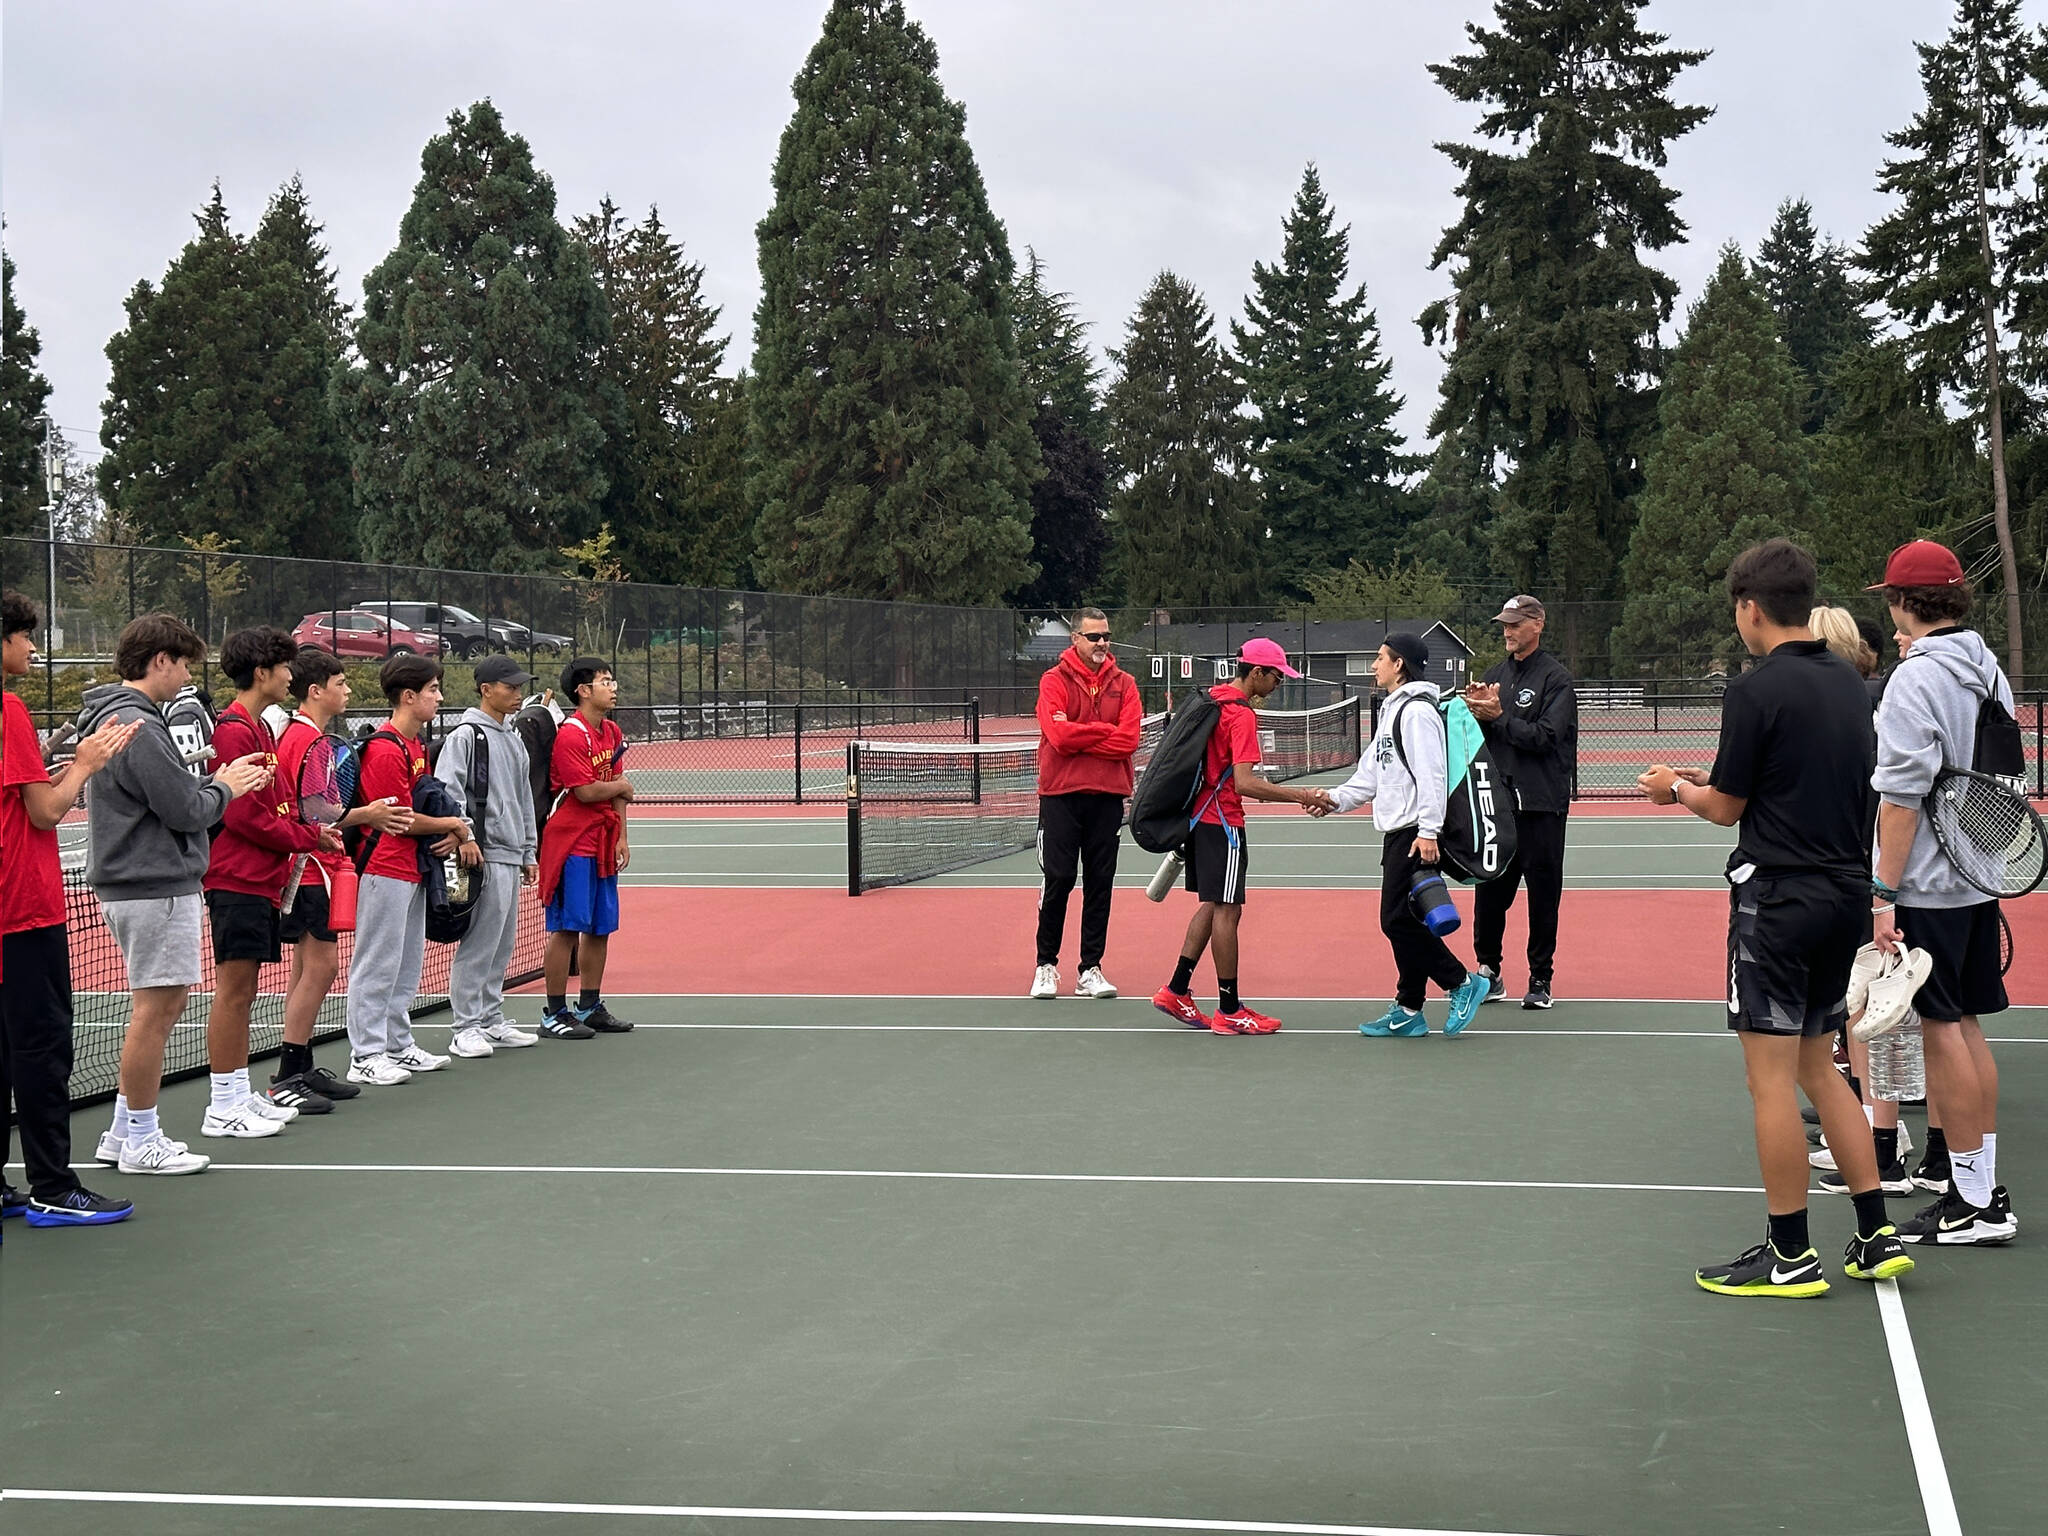 Gavin Orozco (Bonney Lake #1 Singles in white) shaking hands with Sanchit Sharma (Thomas Jefferson #1 Singles in red). Photo by Andy Orozco